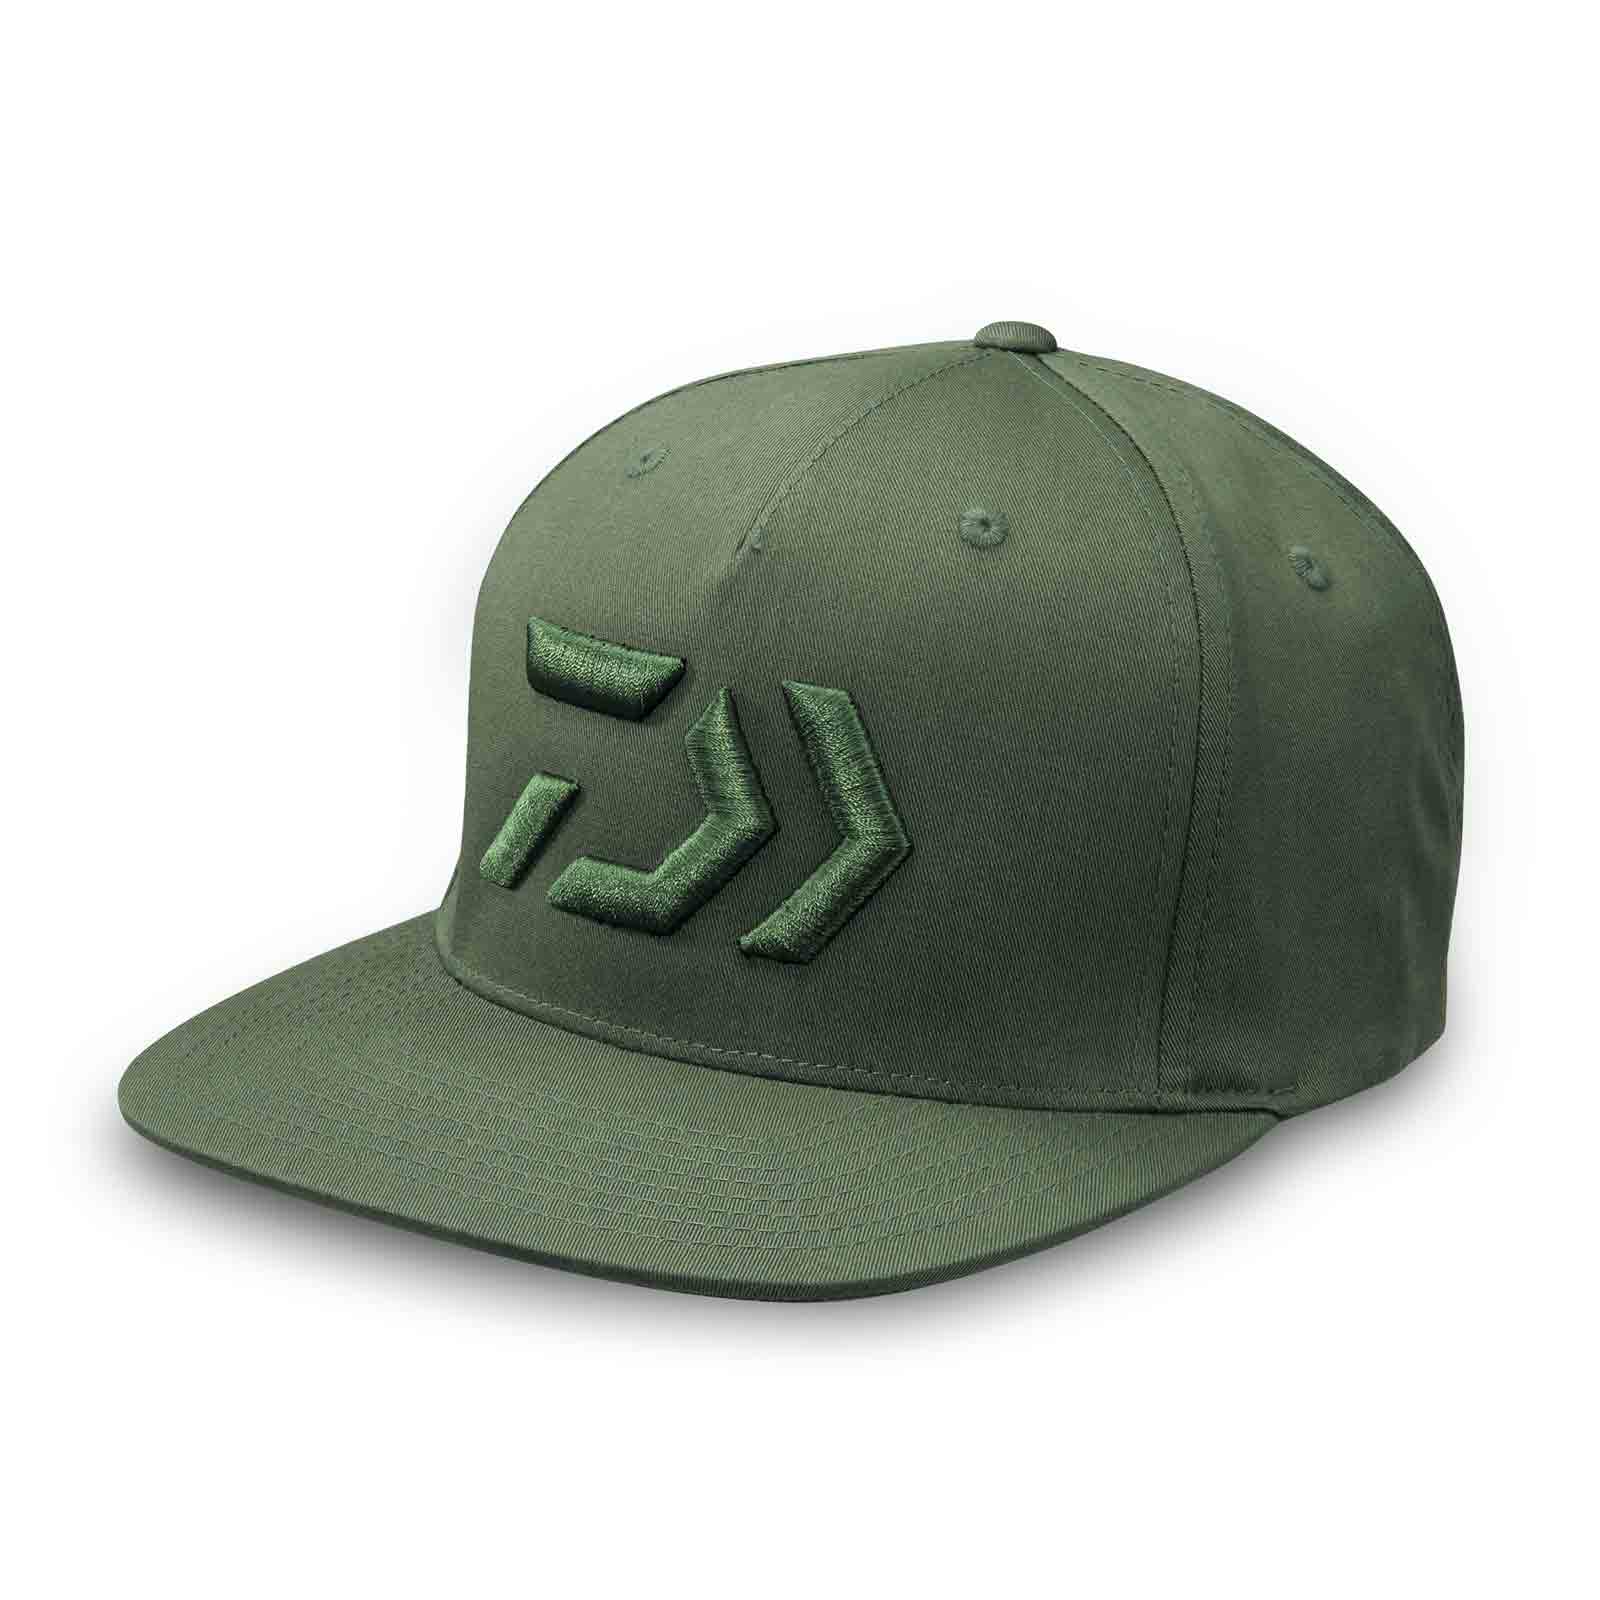 Daiwa D-VEC PINCH BILL WITH EMBROIDERED LOGO Green Hats